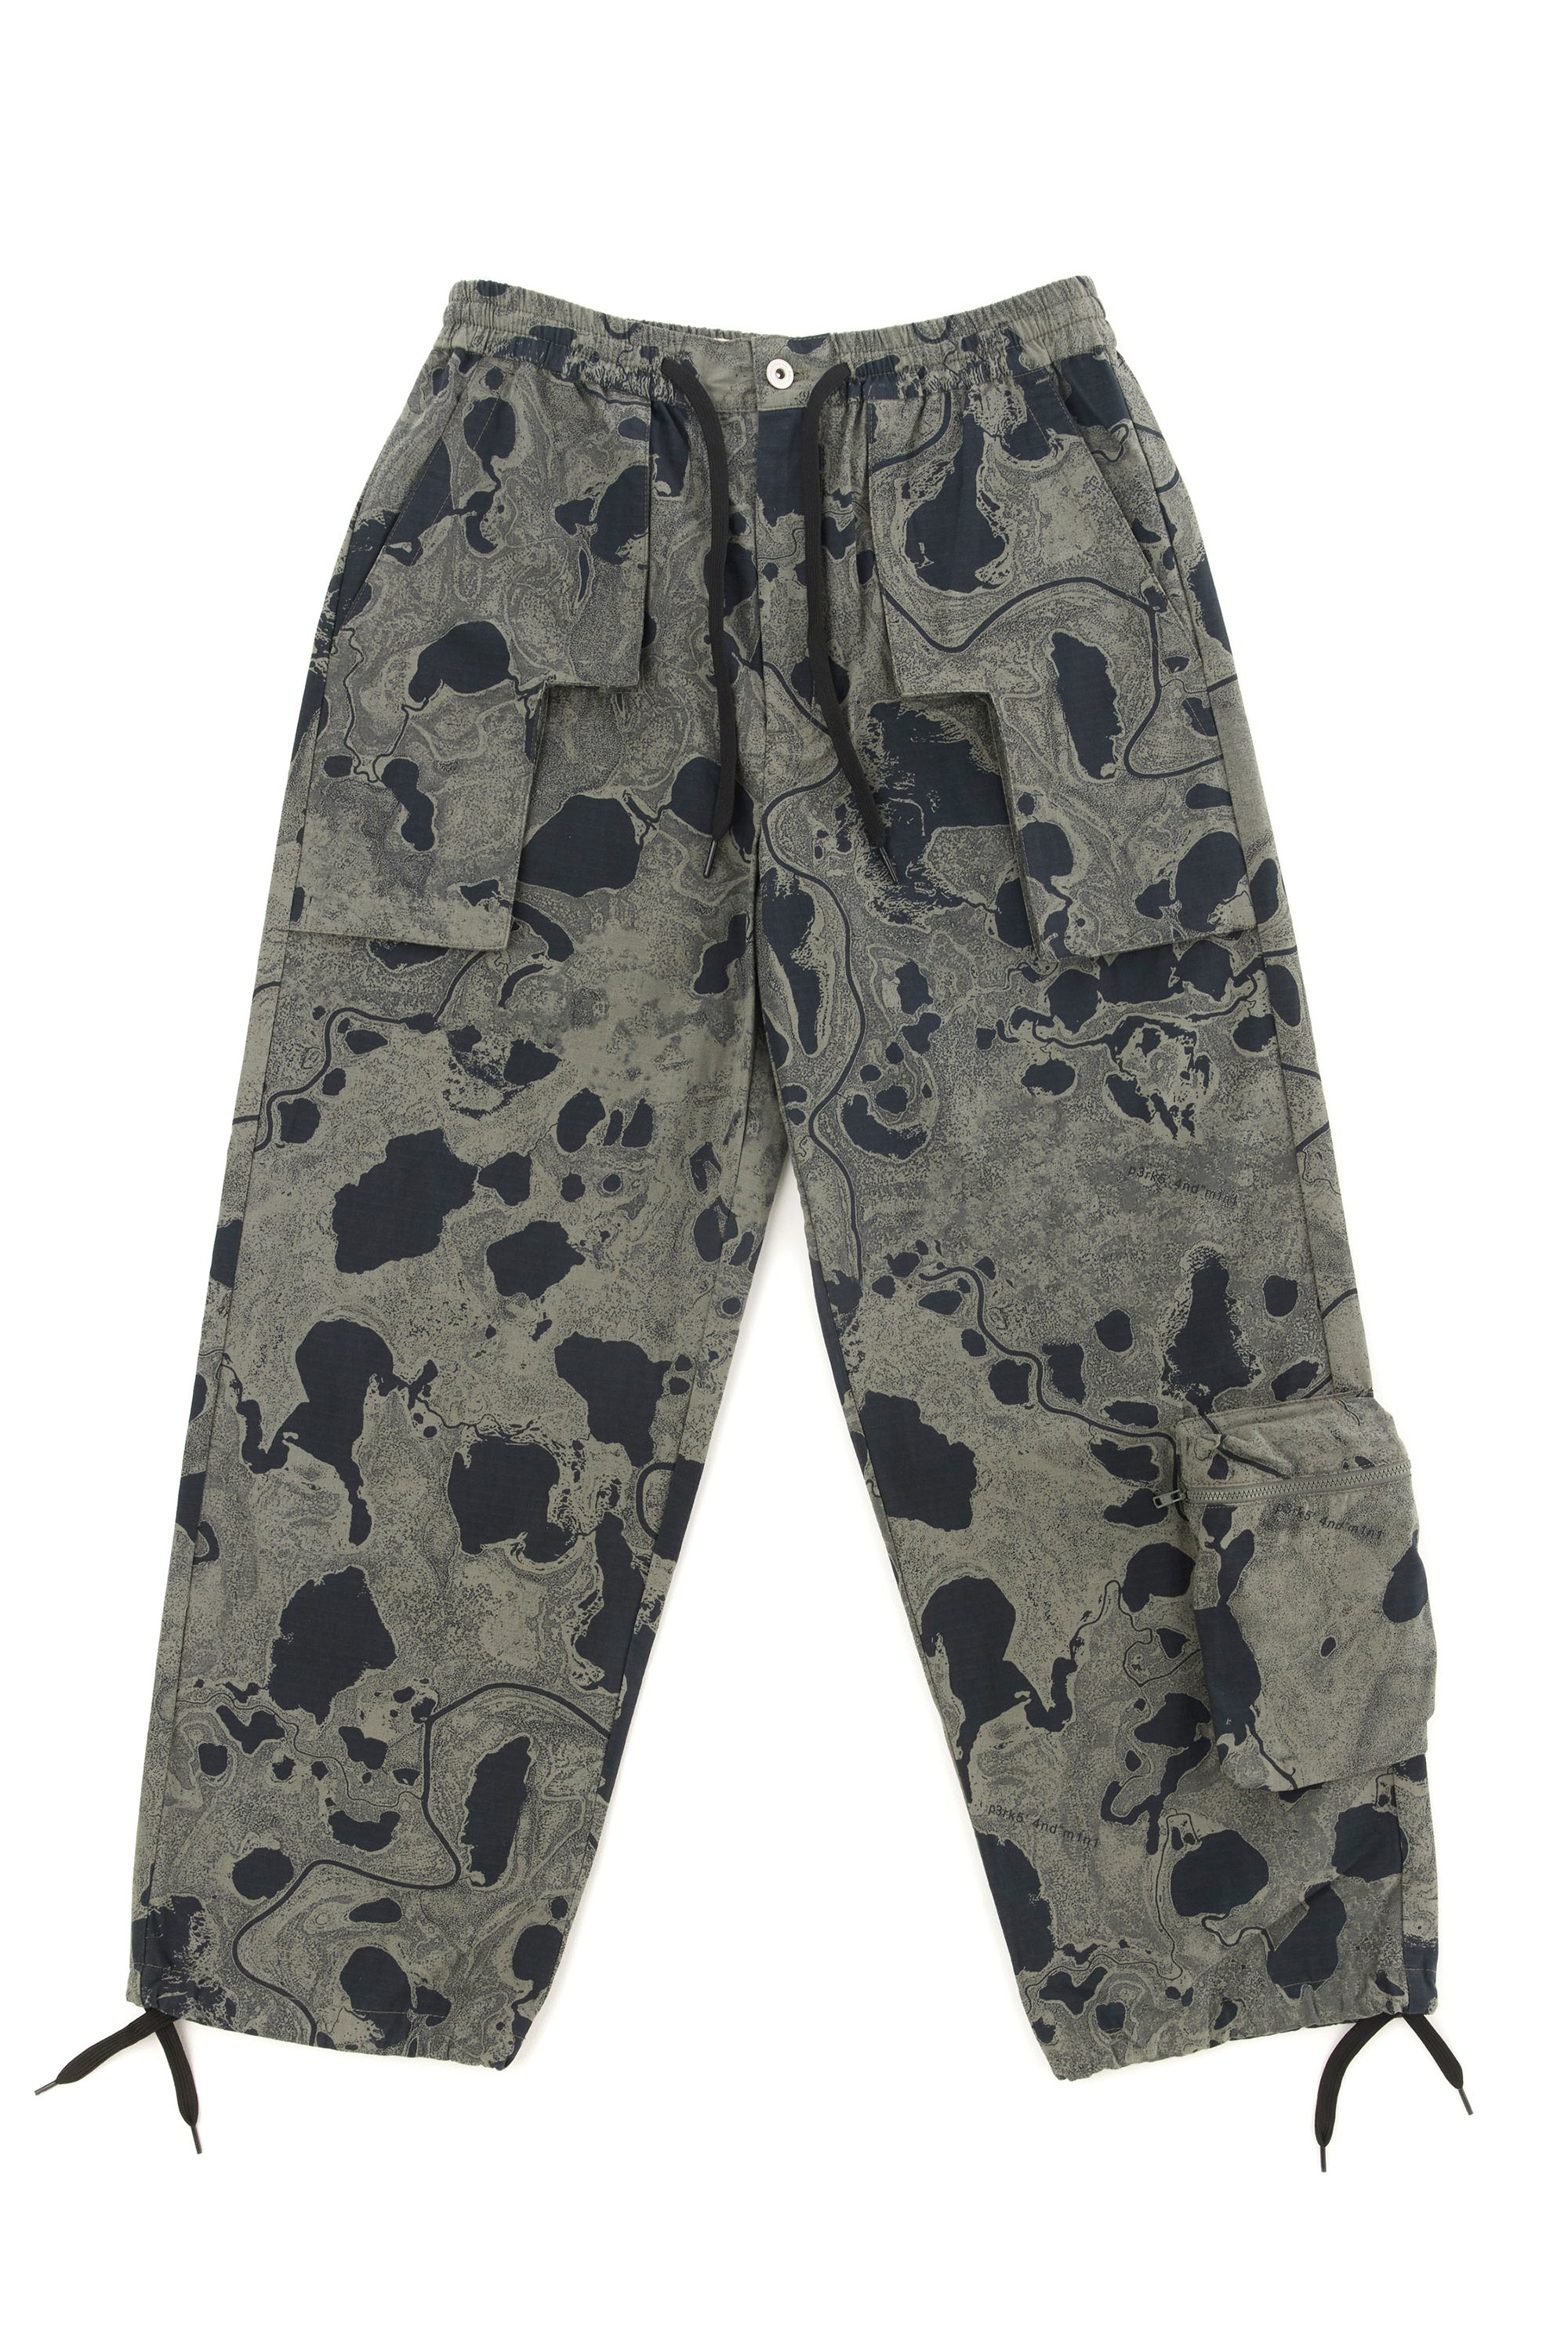 The GEO MAPPING PRINTED RETURN PANT  available online with global shipping, and in PAM Stores Melbourne and Sydney.